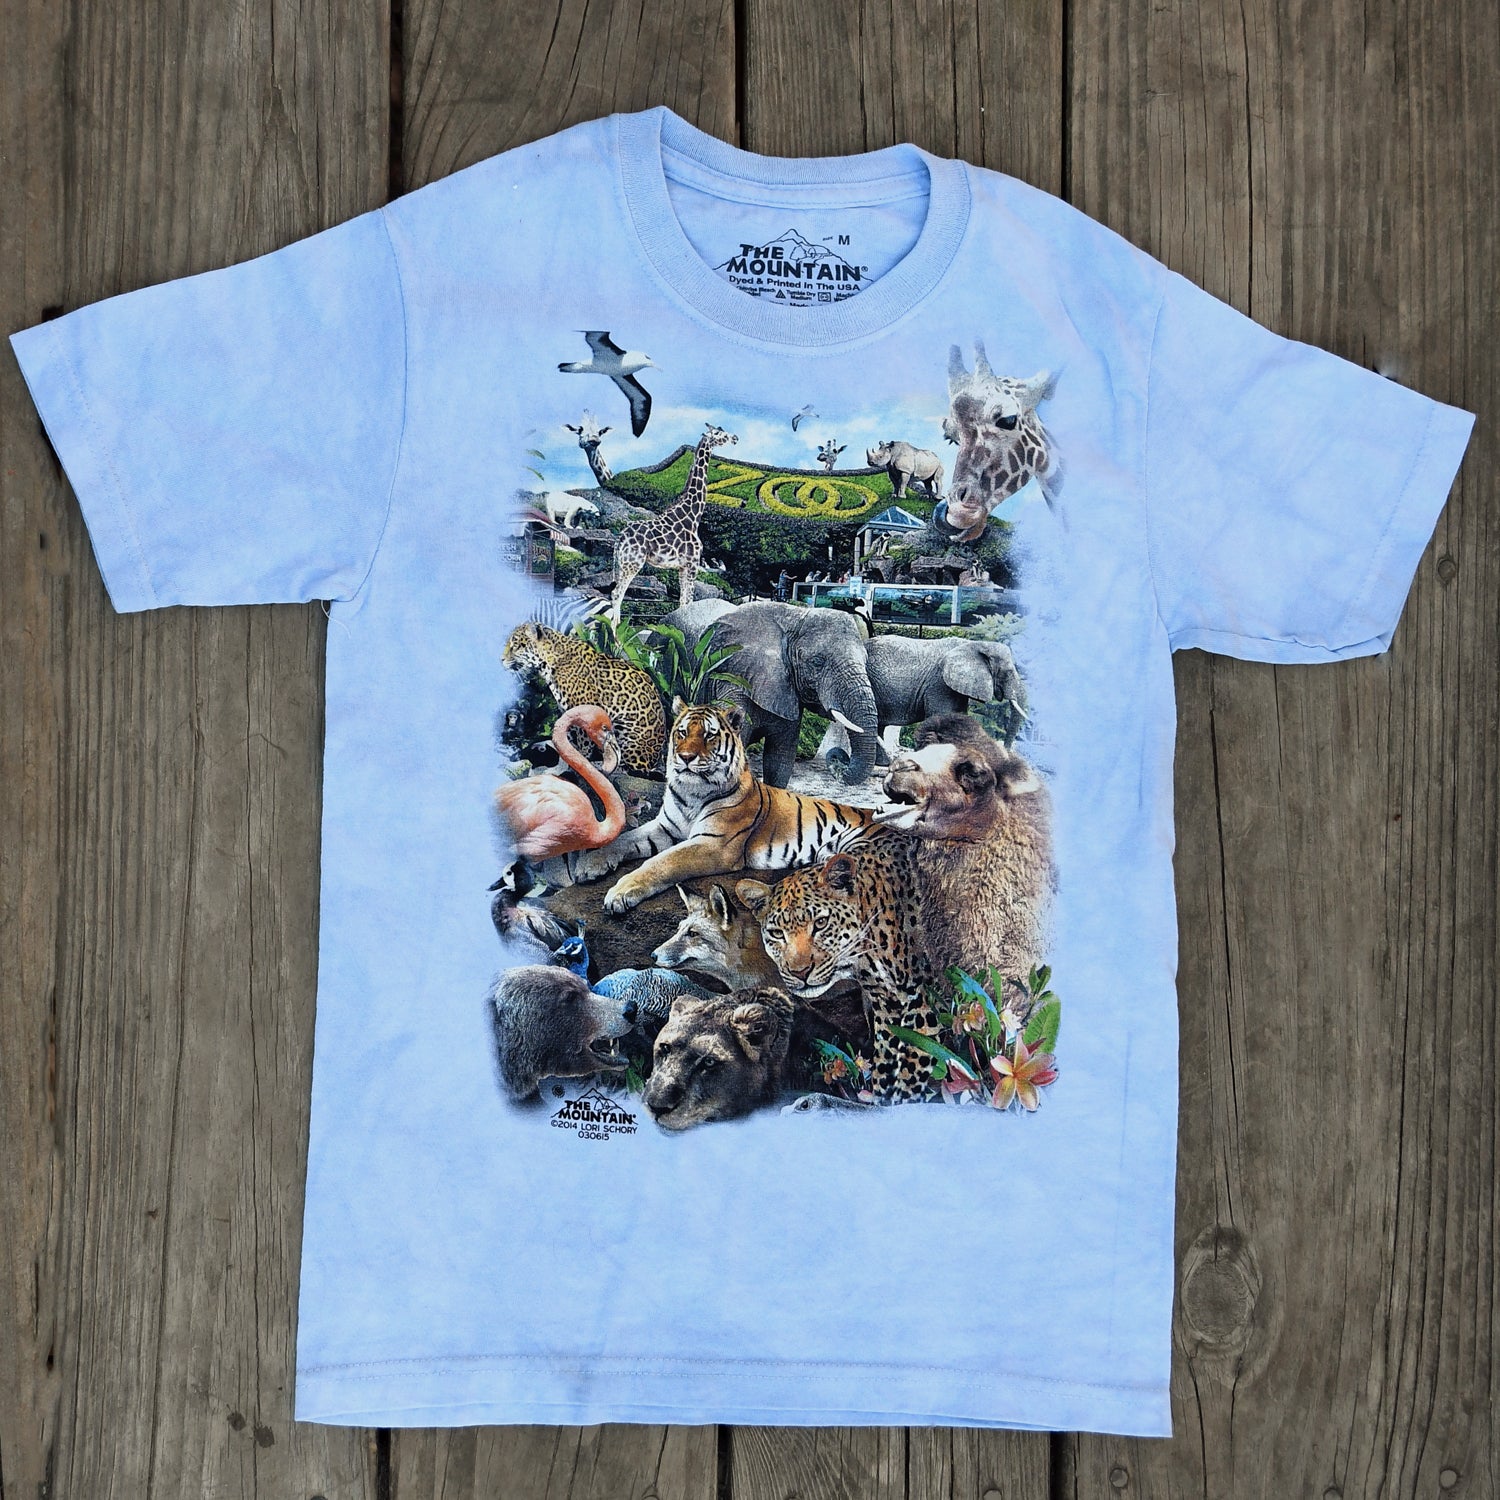 Zoo T-shirt in Youth sizes - medium only